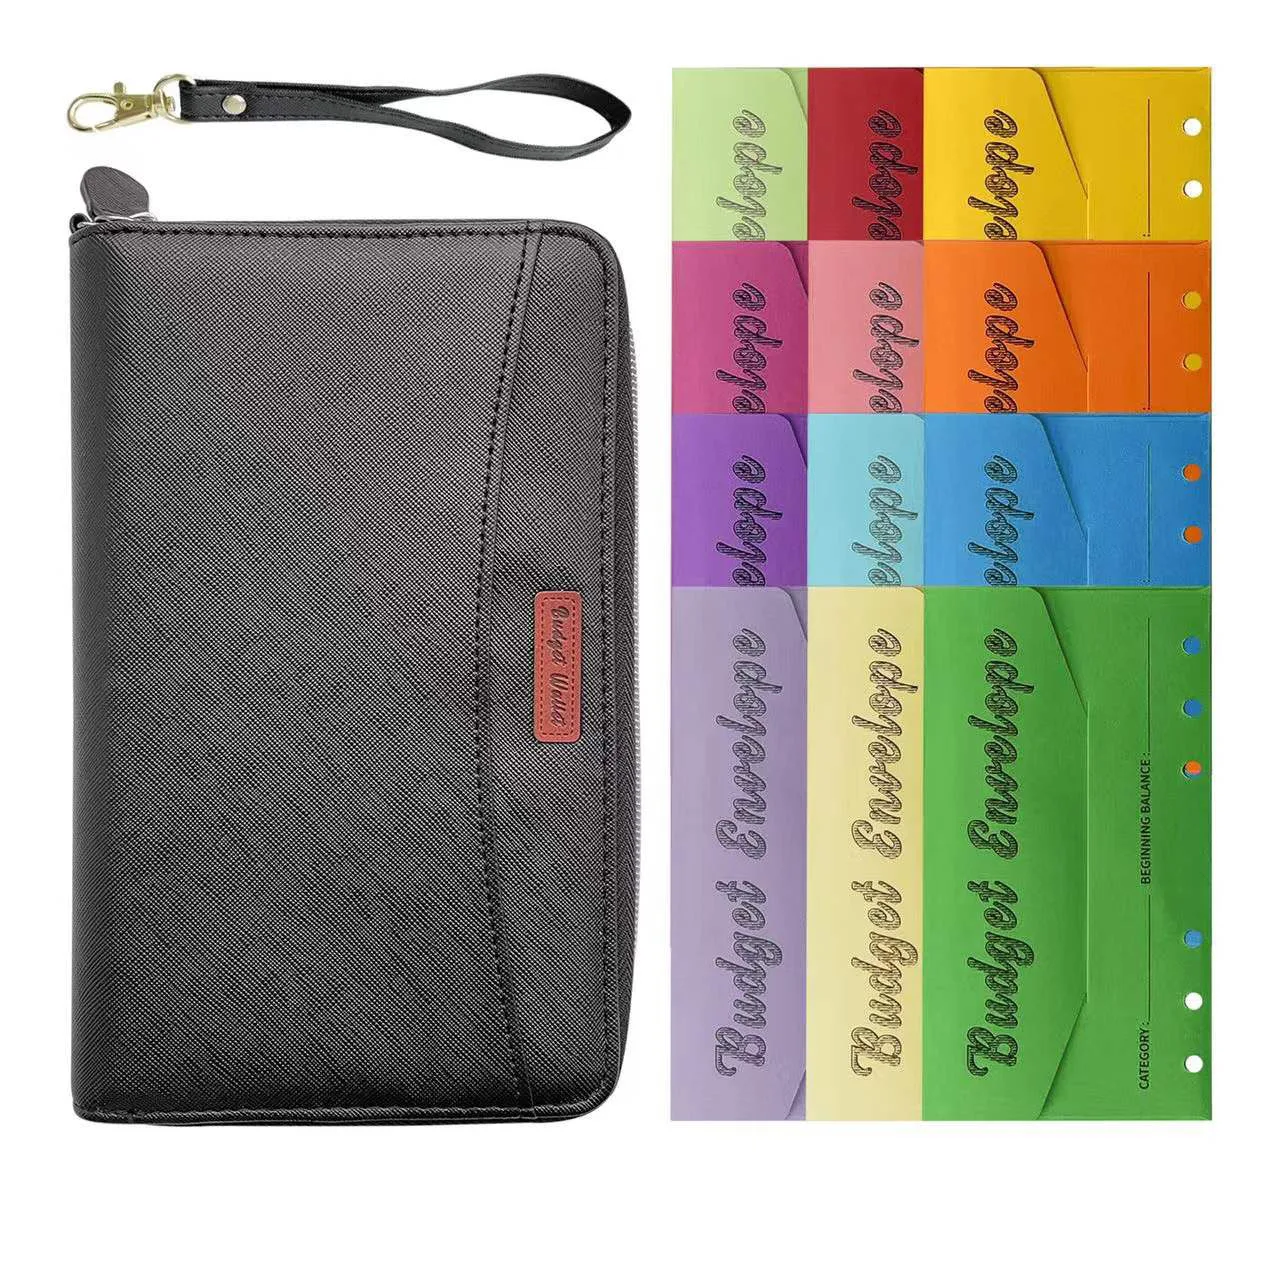 All in One Cash Envelope Wallet Budget Planner Binder Organizer System with 12 Cash Envelopes, for Budgeting and Saving Money